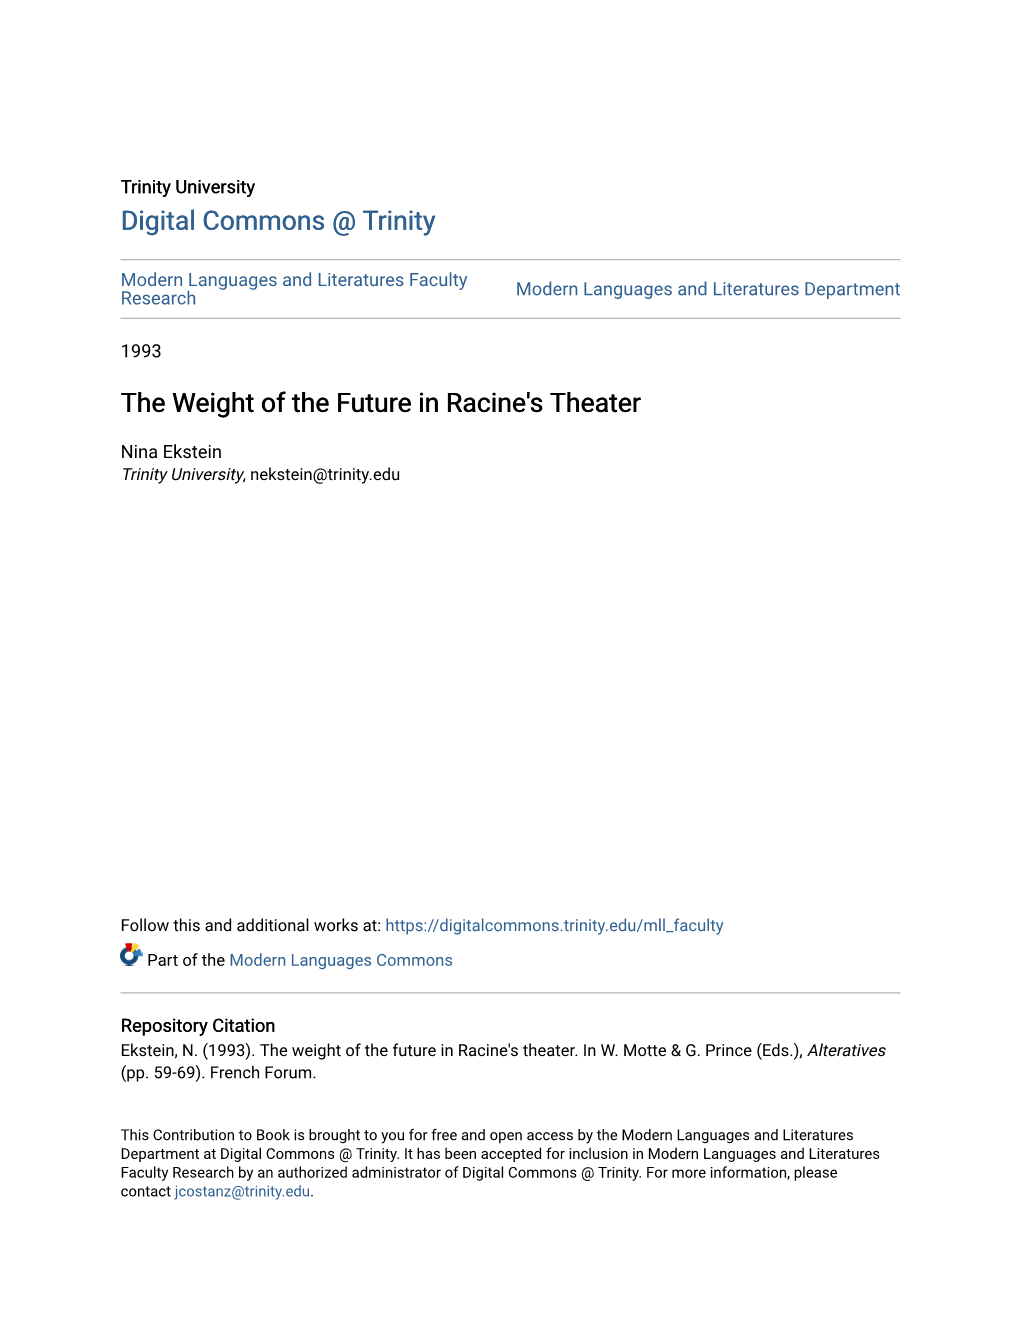 The Weight of the Future in Racine's Theater